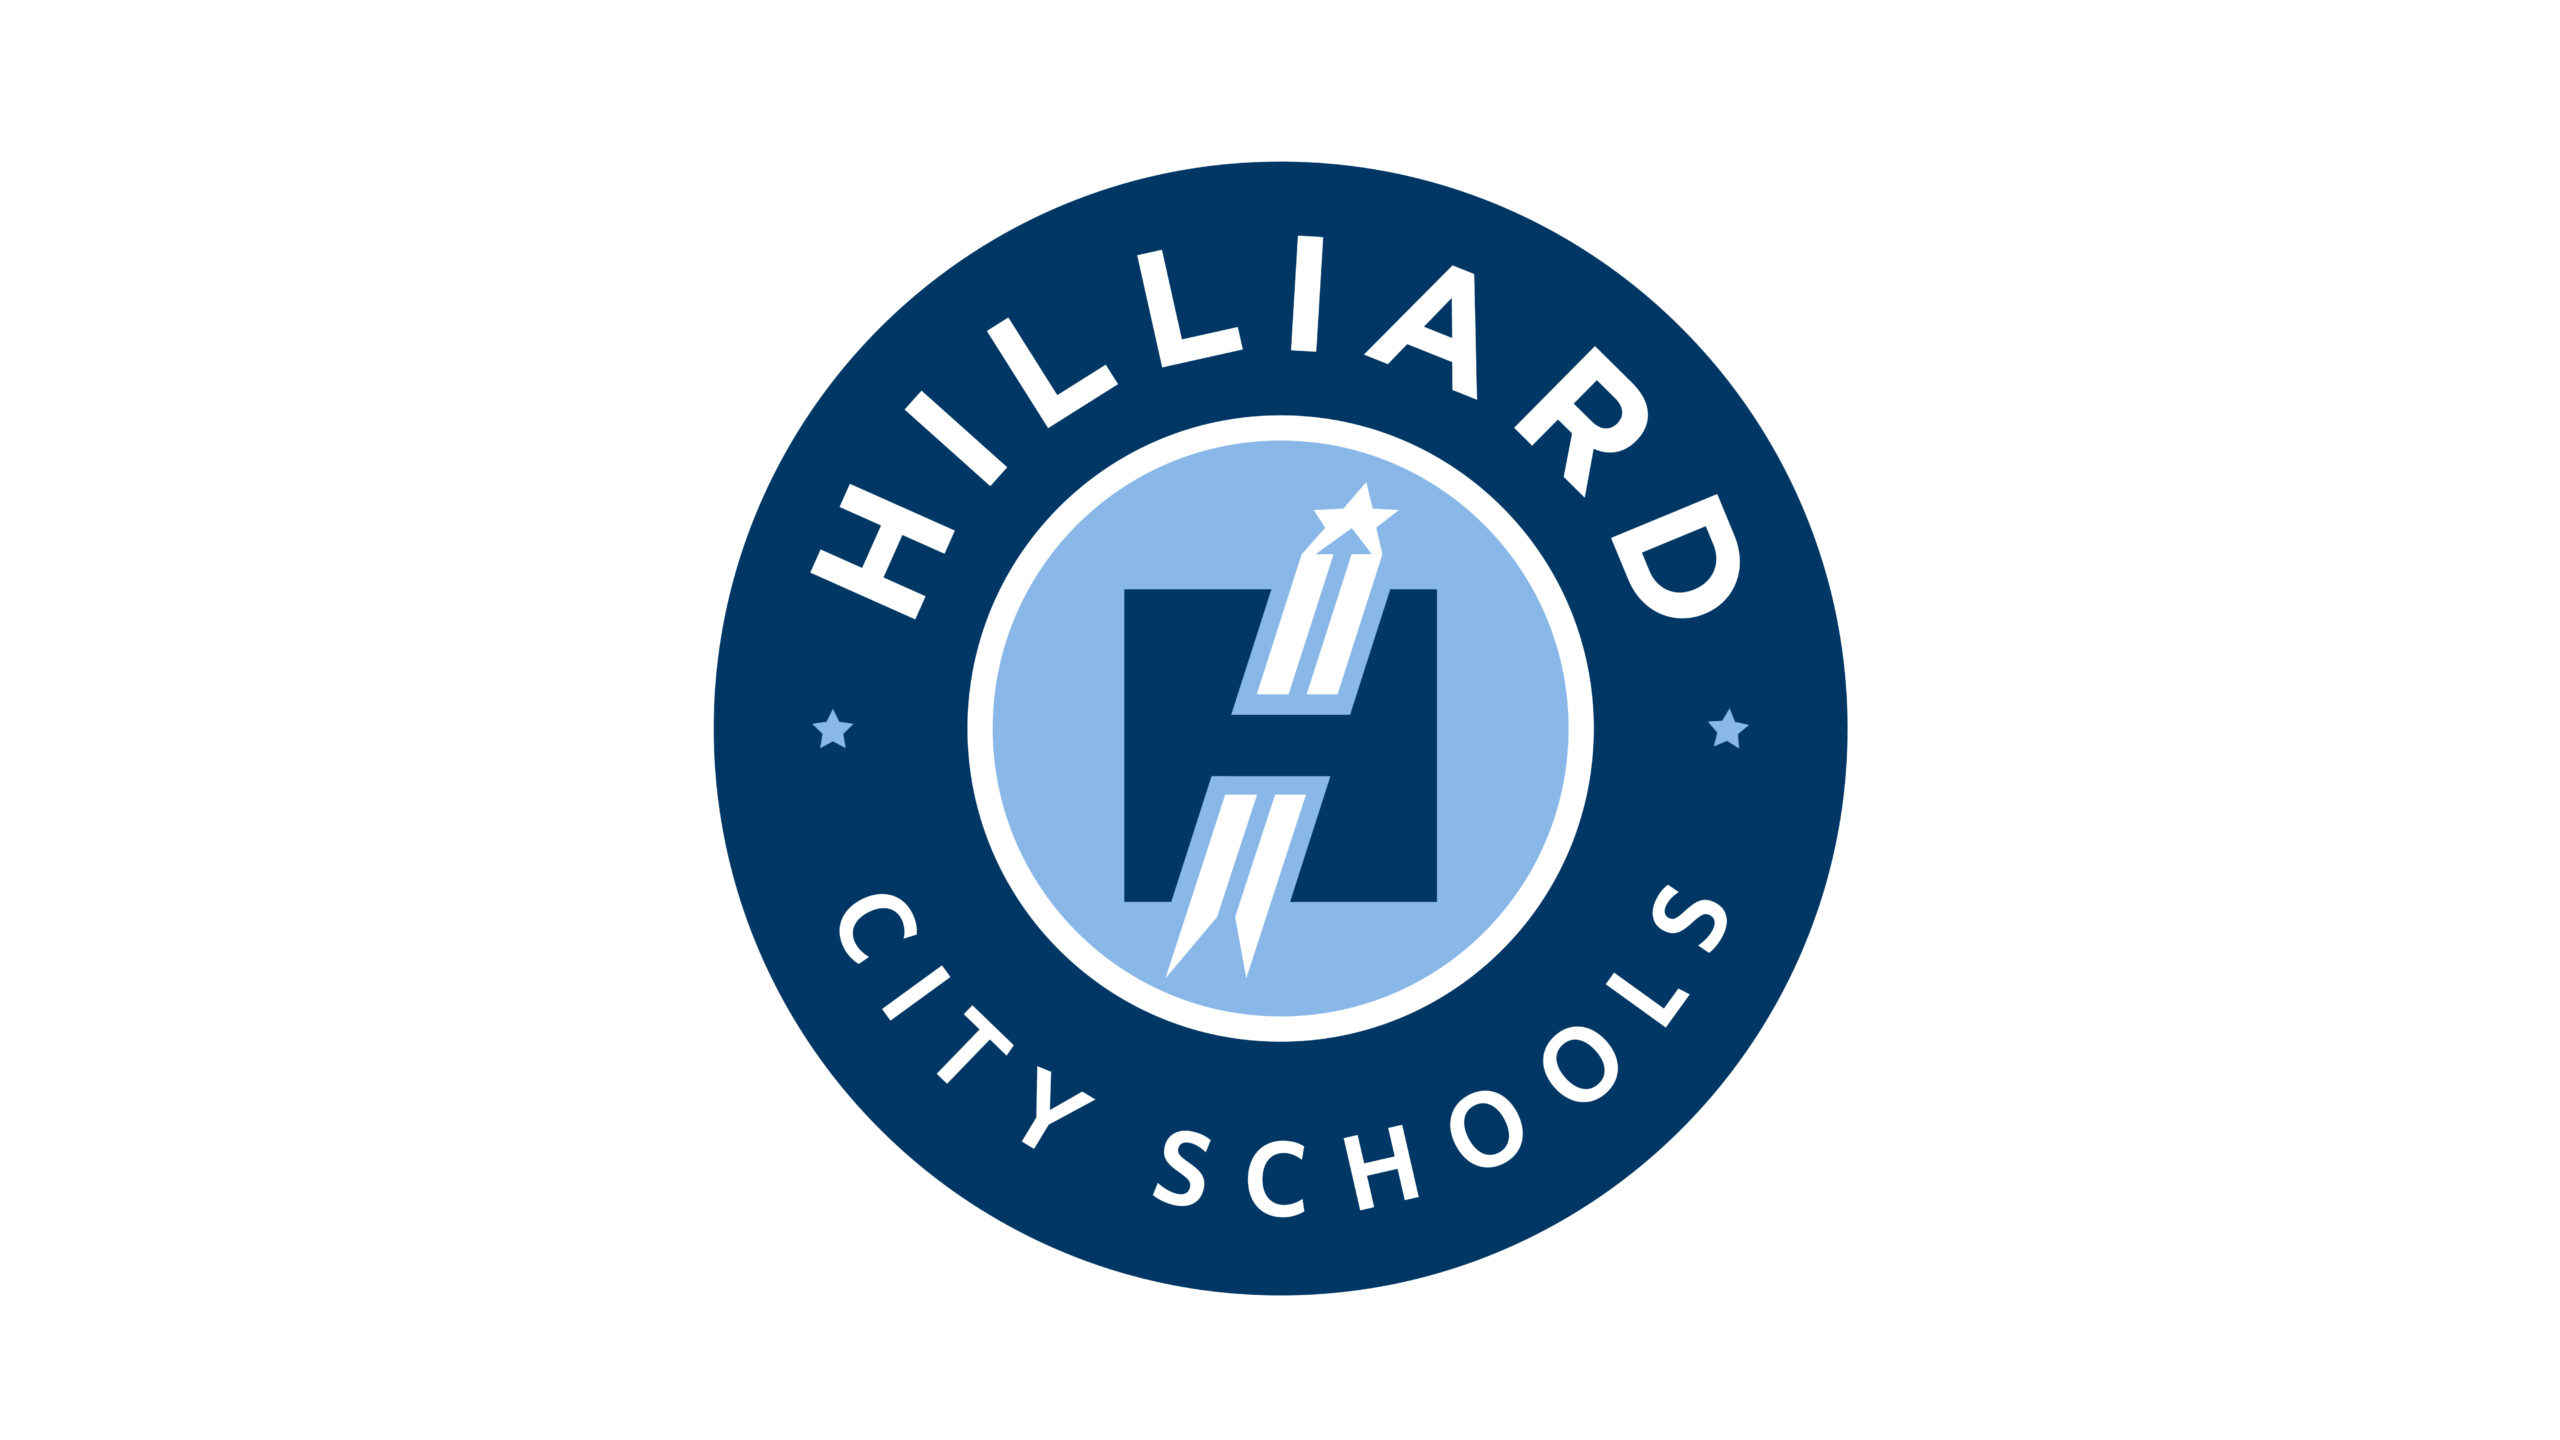 Hilliard Schools Ranked First in the State in Value-Added on State Report Card